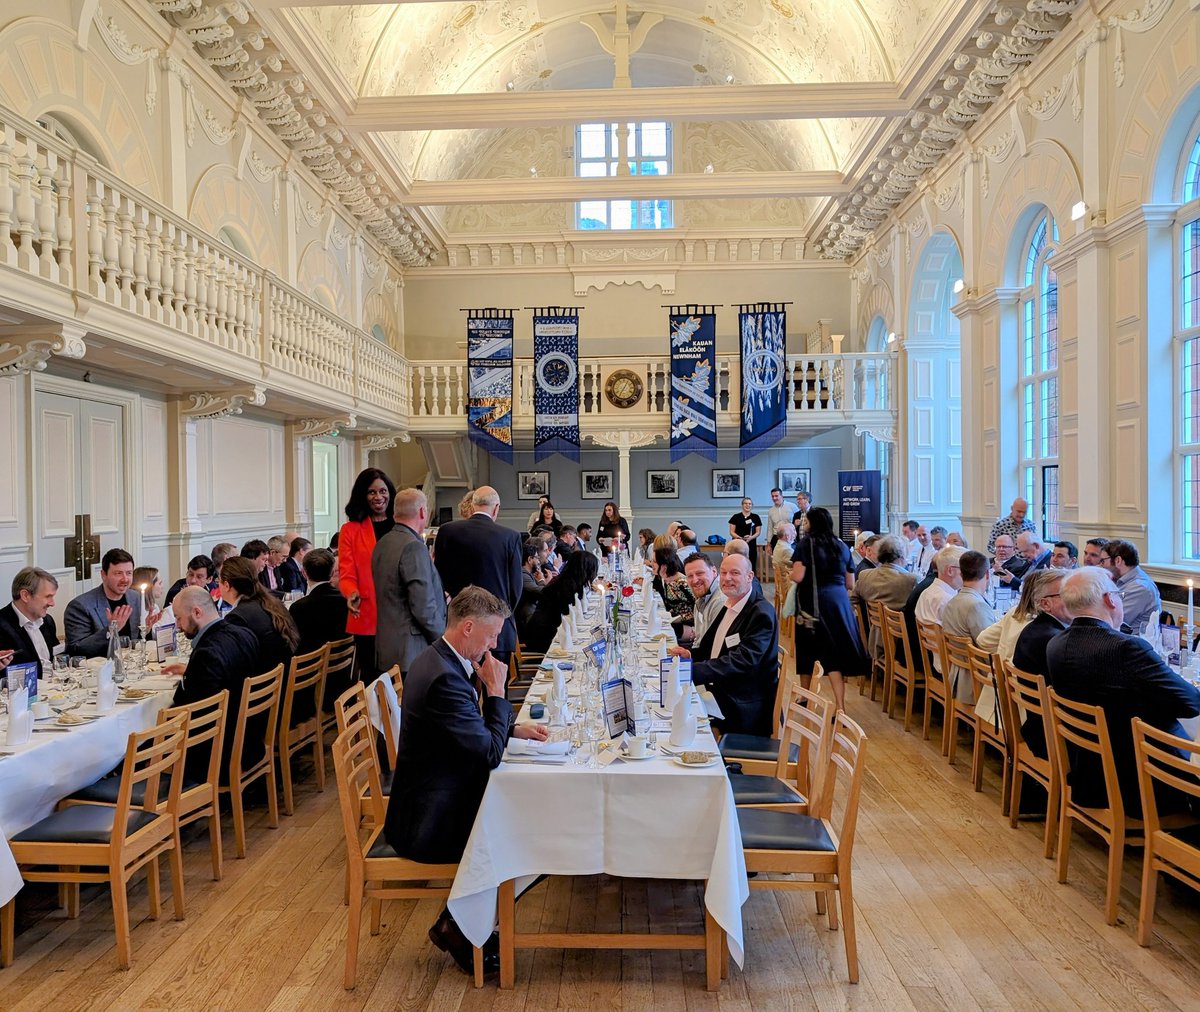 Taking our seats for the @CambWireless Founders Dinner at Newnham College, Cambridge, after the #CWeMBB SIG event on #mobilebackhaul - #4G #LTE #5G